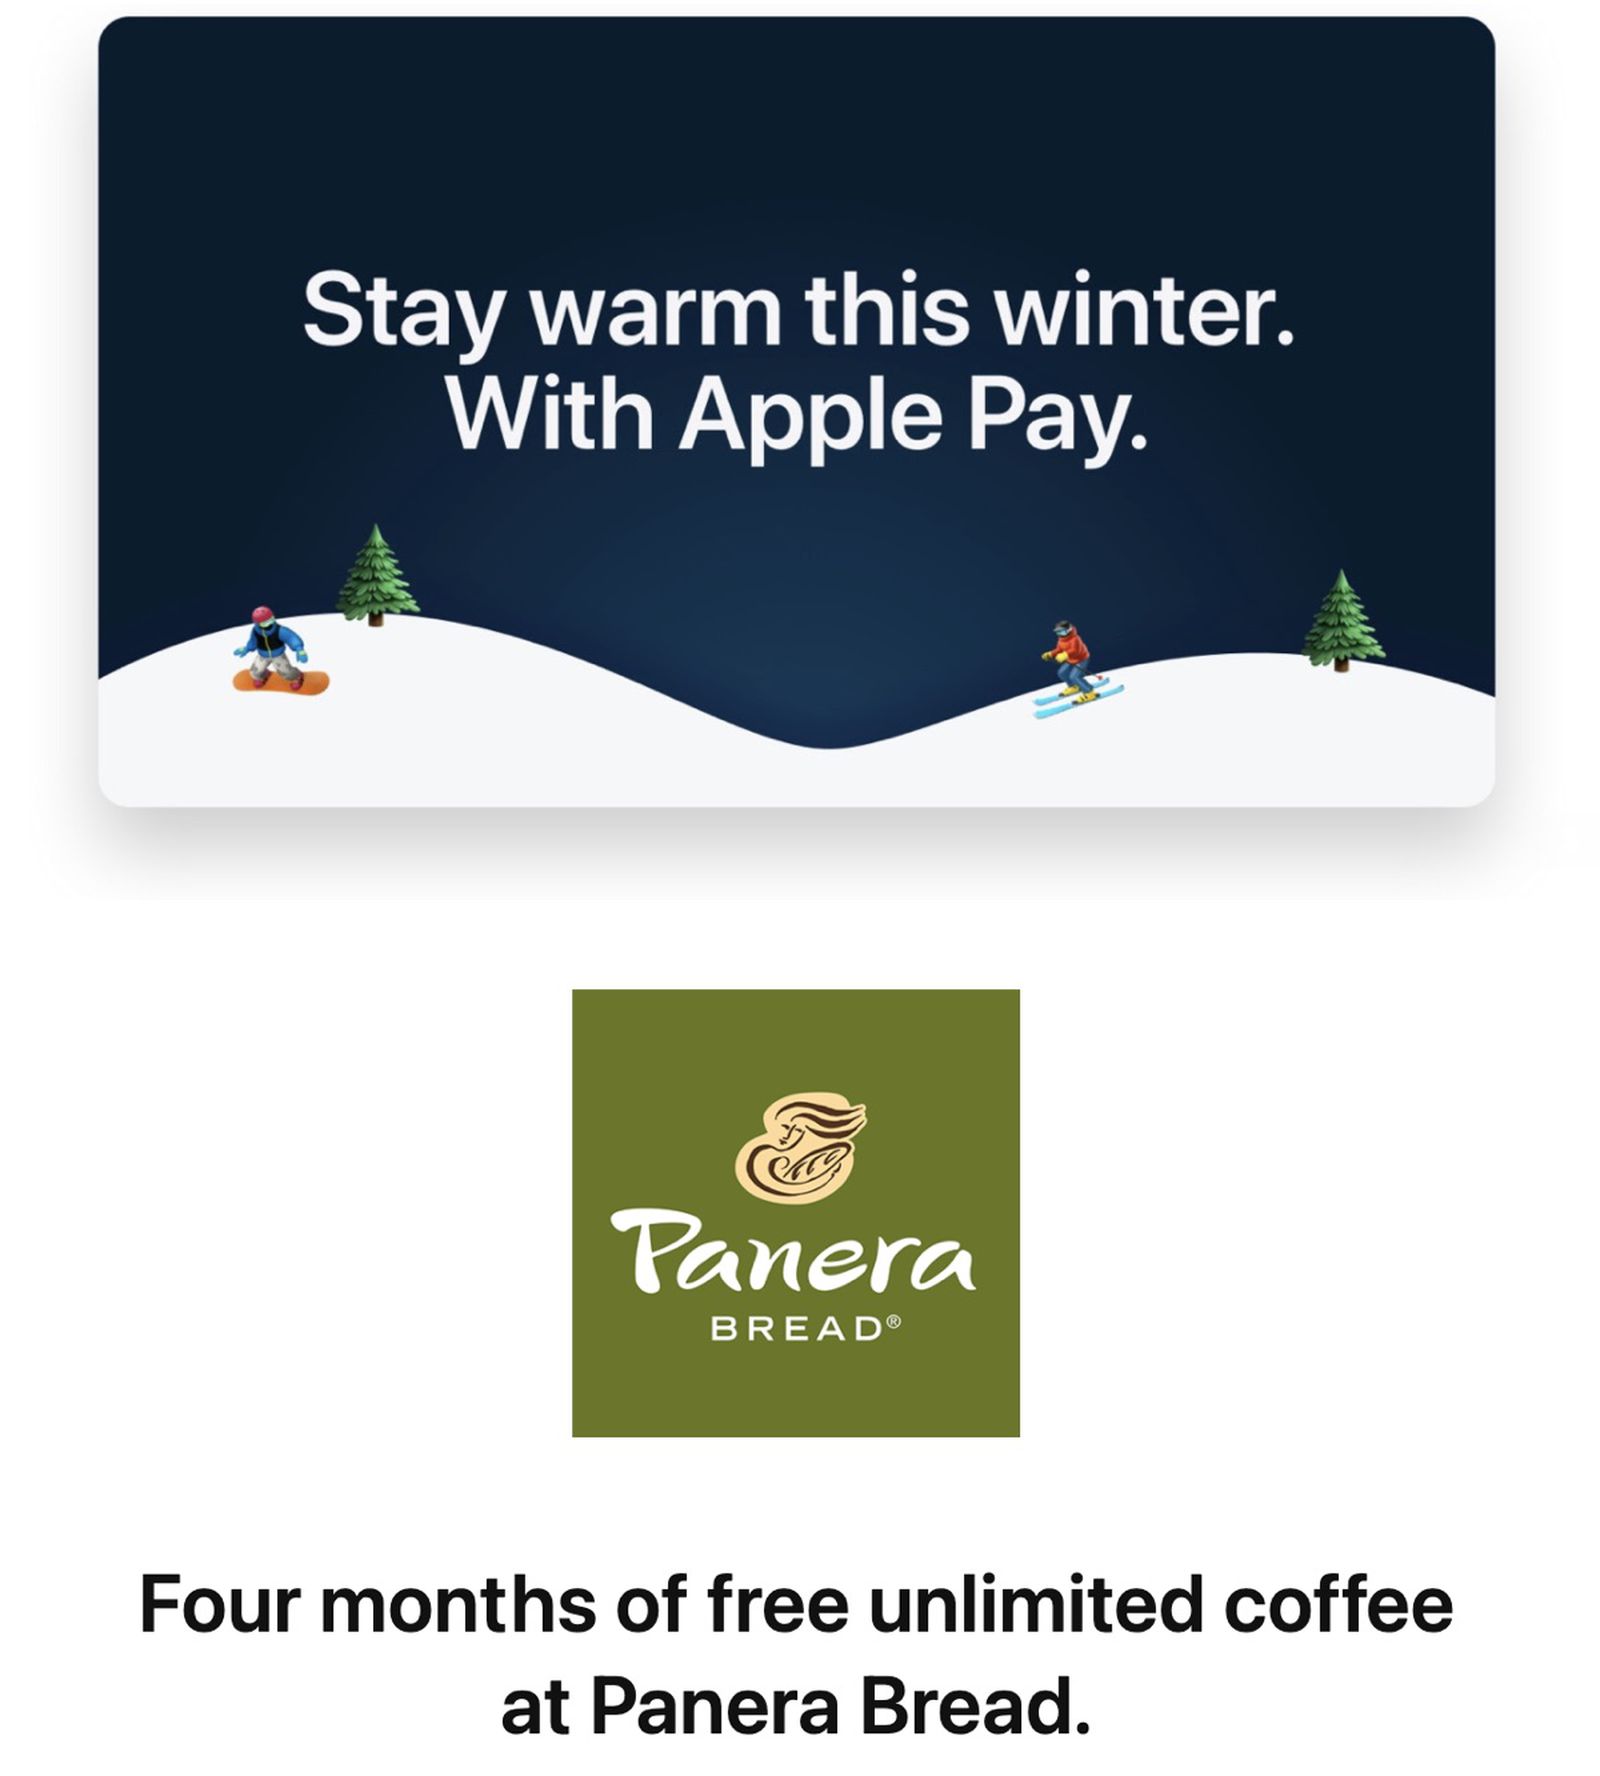 photo of Apple Pay Promo Offers Four Months of Free Coffee From Panera Bread image